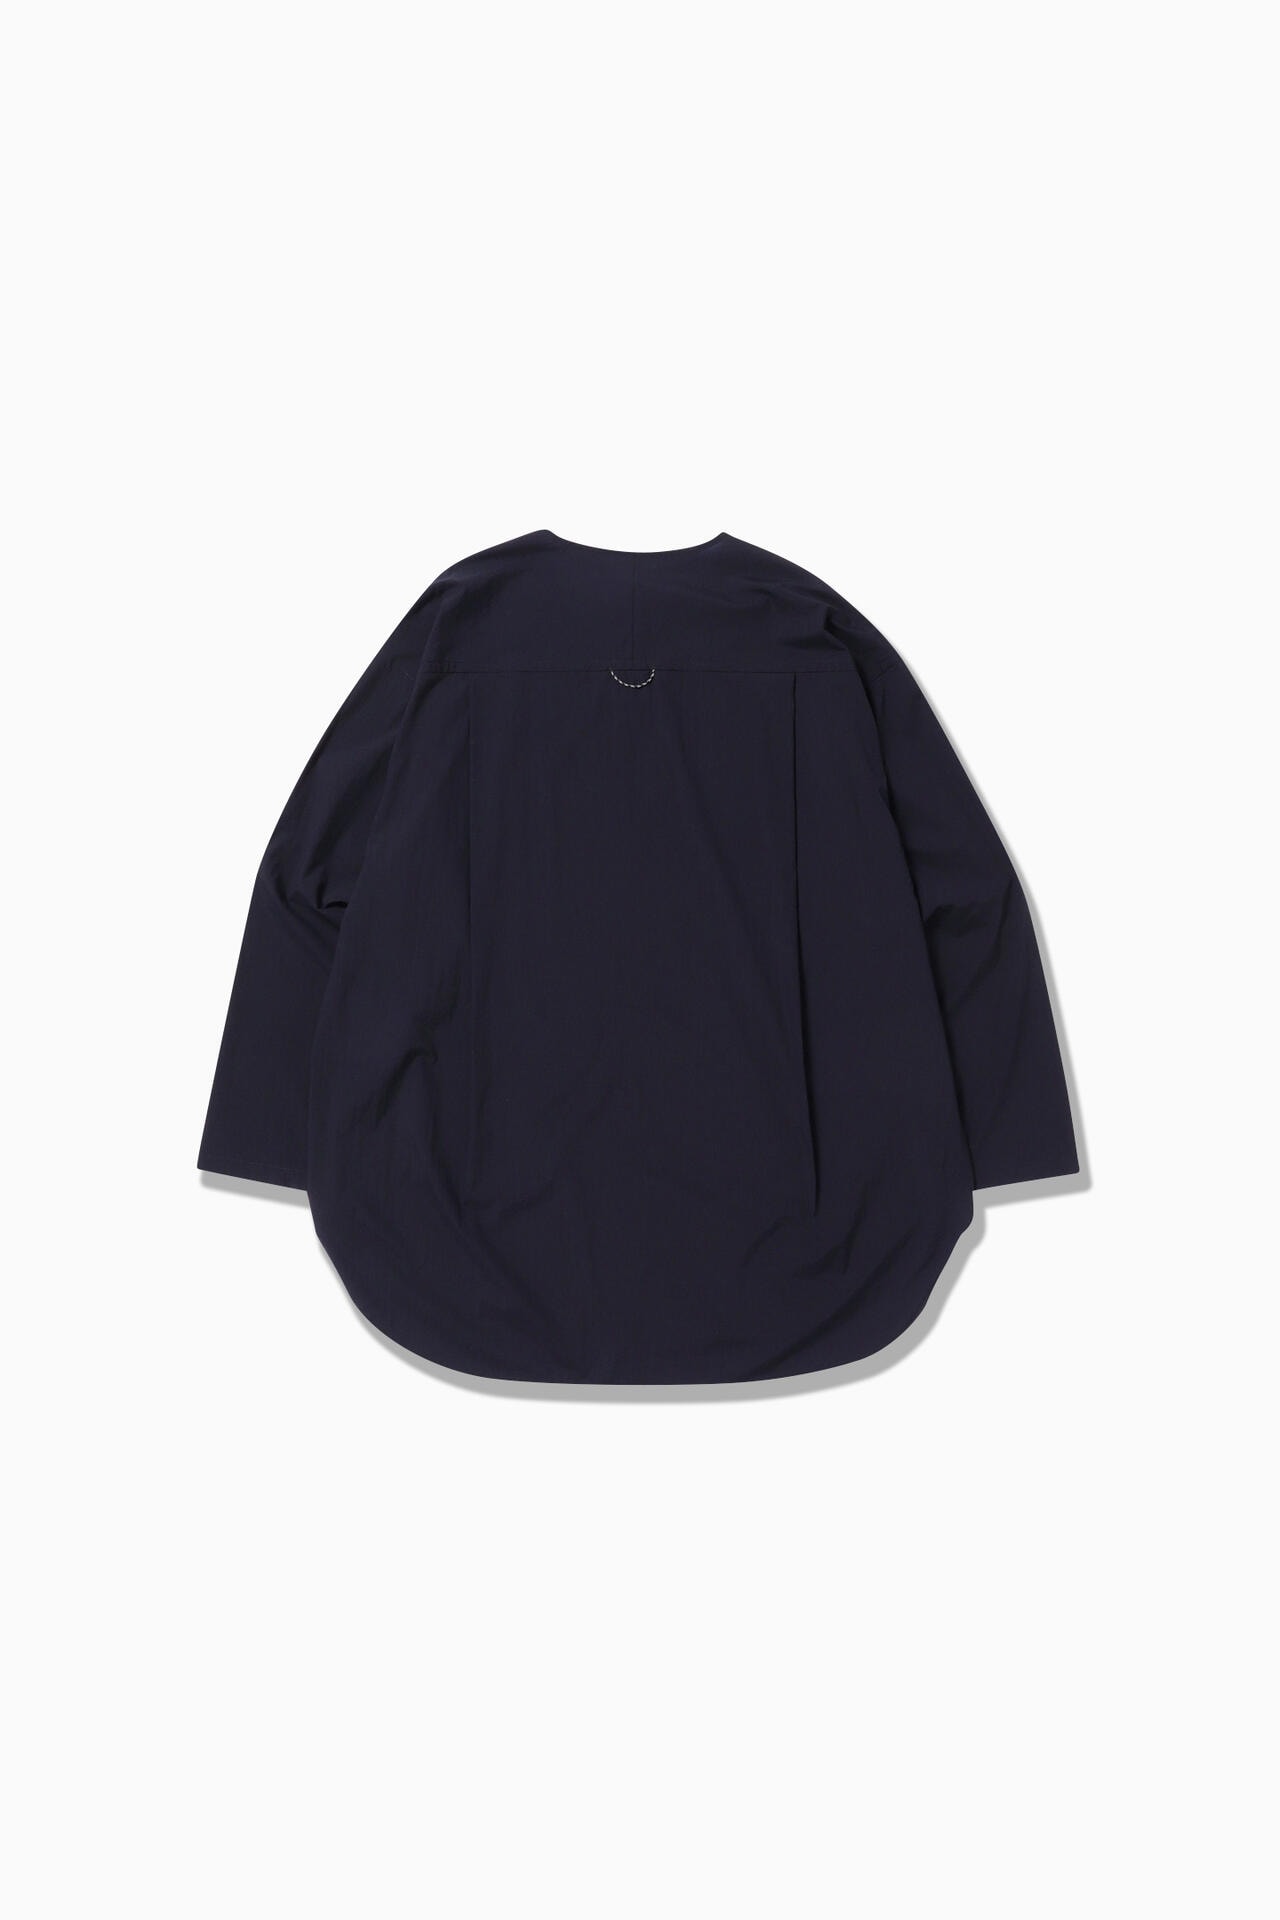 packable light pullover | shirts | and wander ONLINE STORE